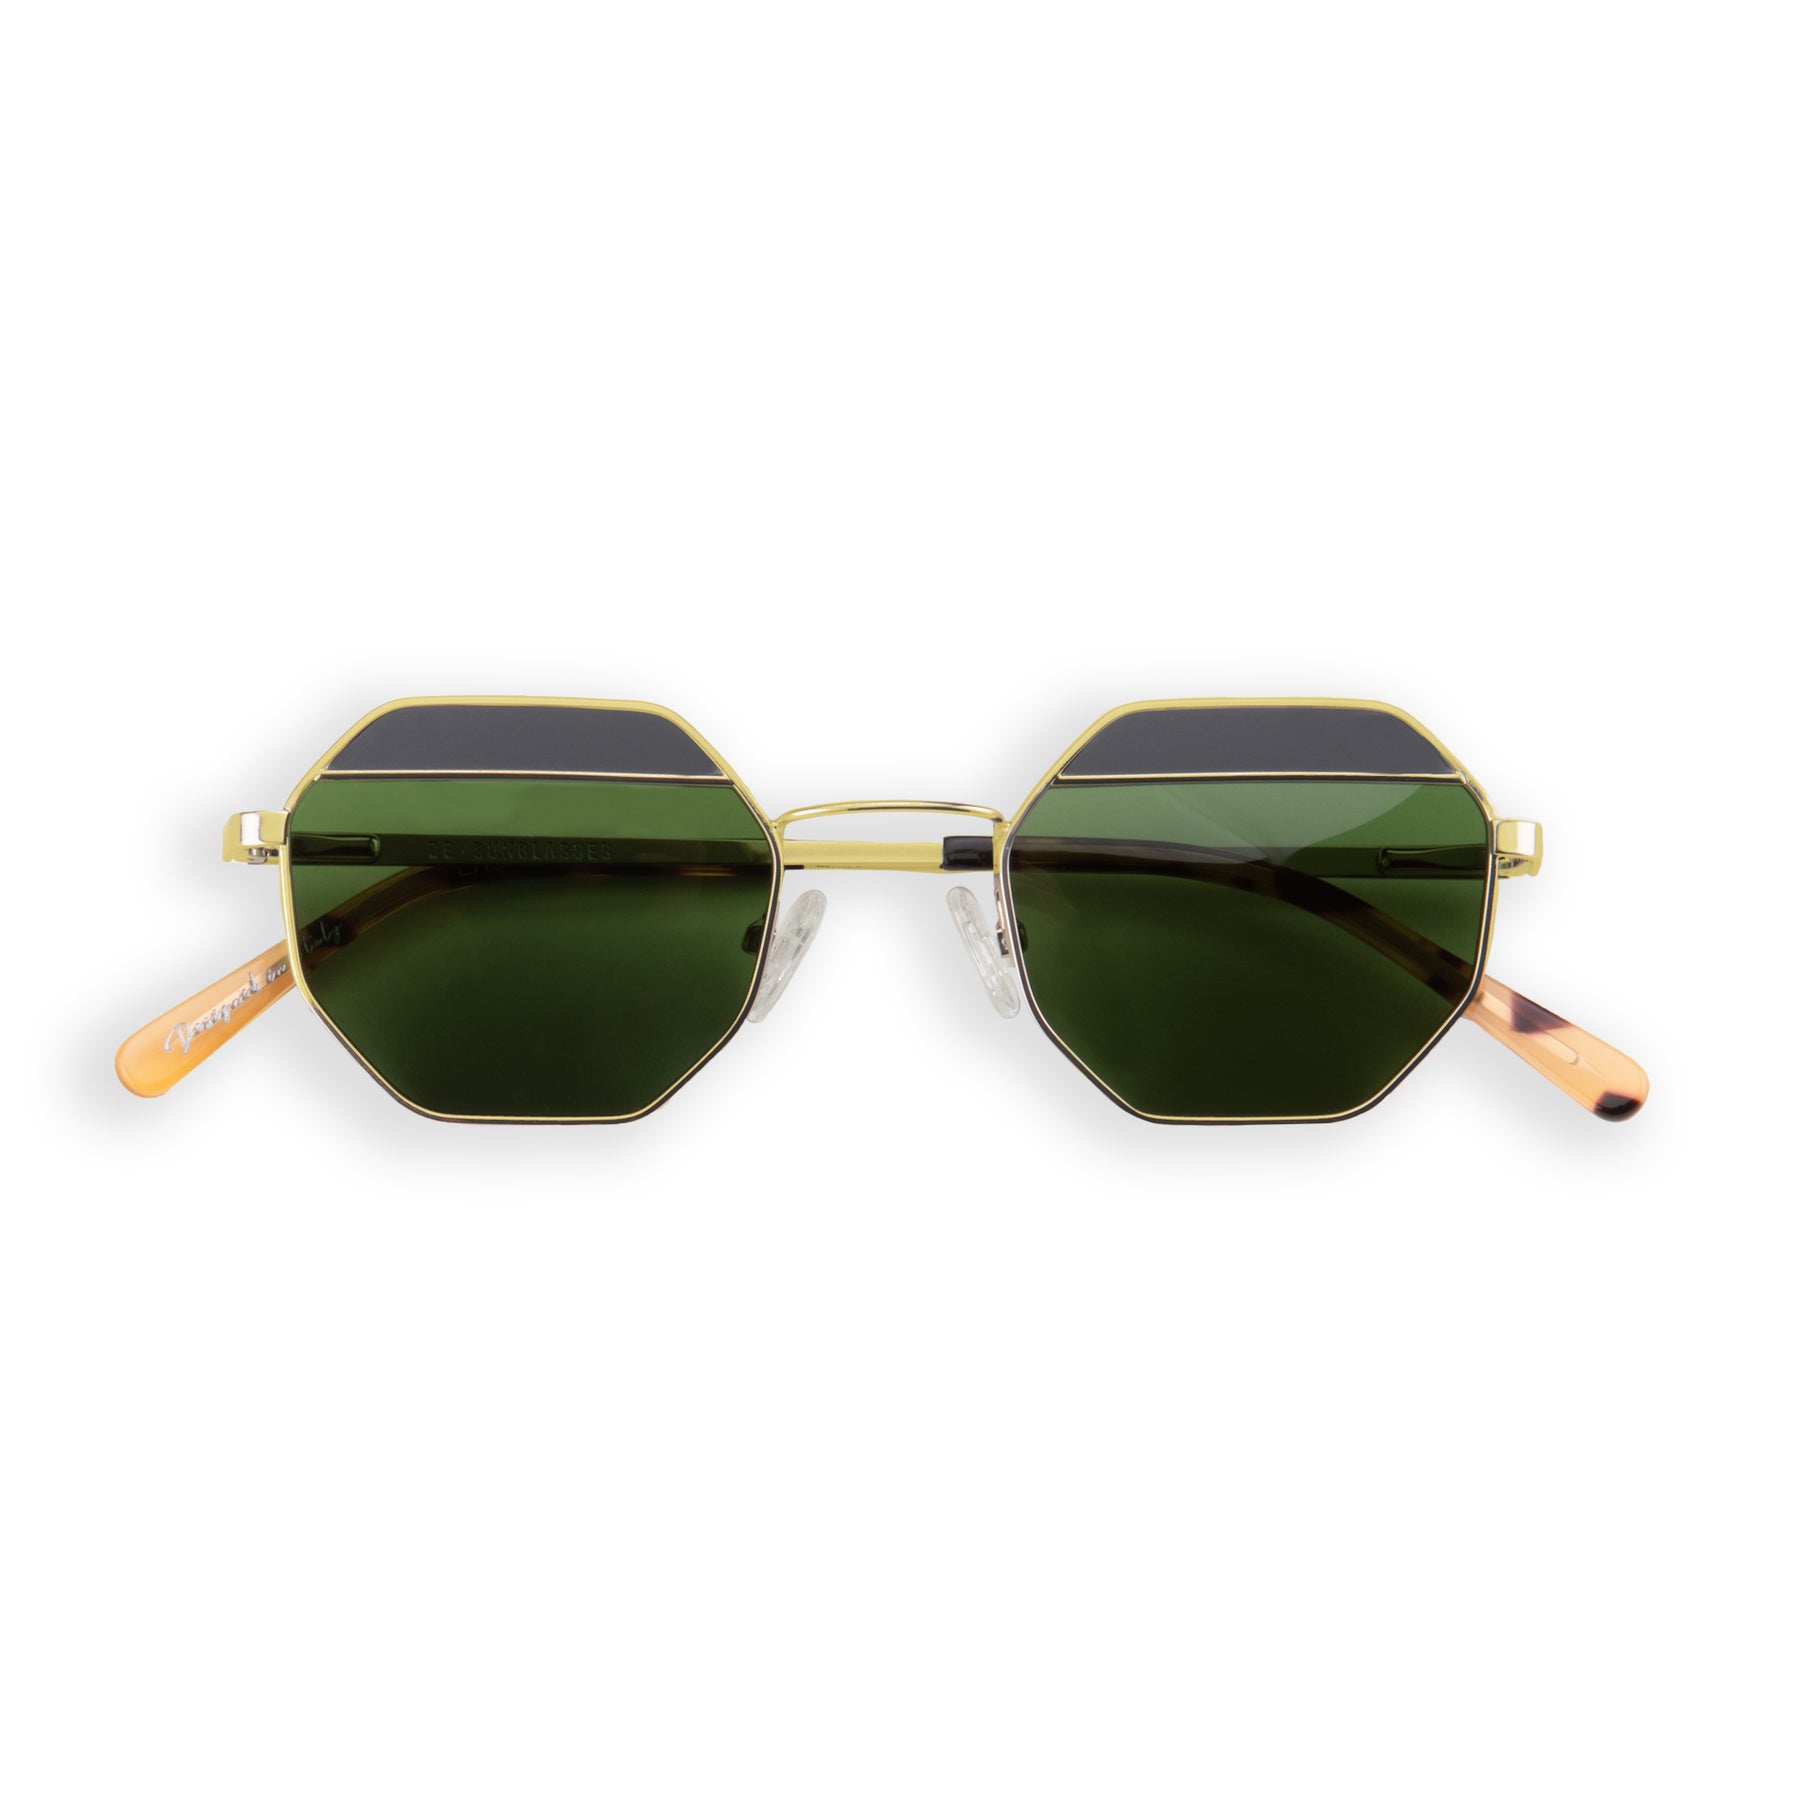 a pair of green glasses on a white surface 